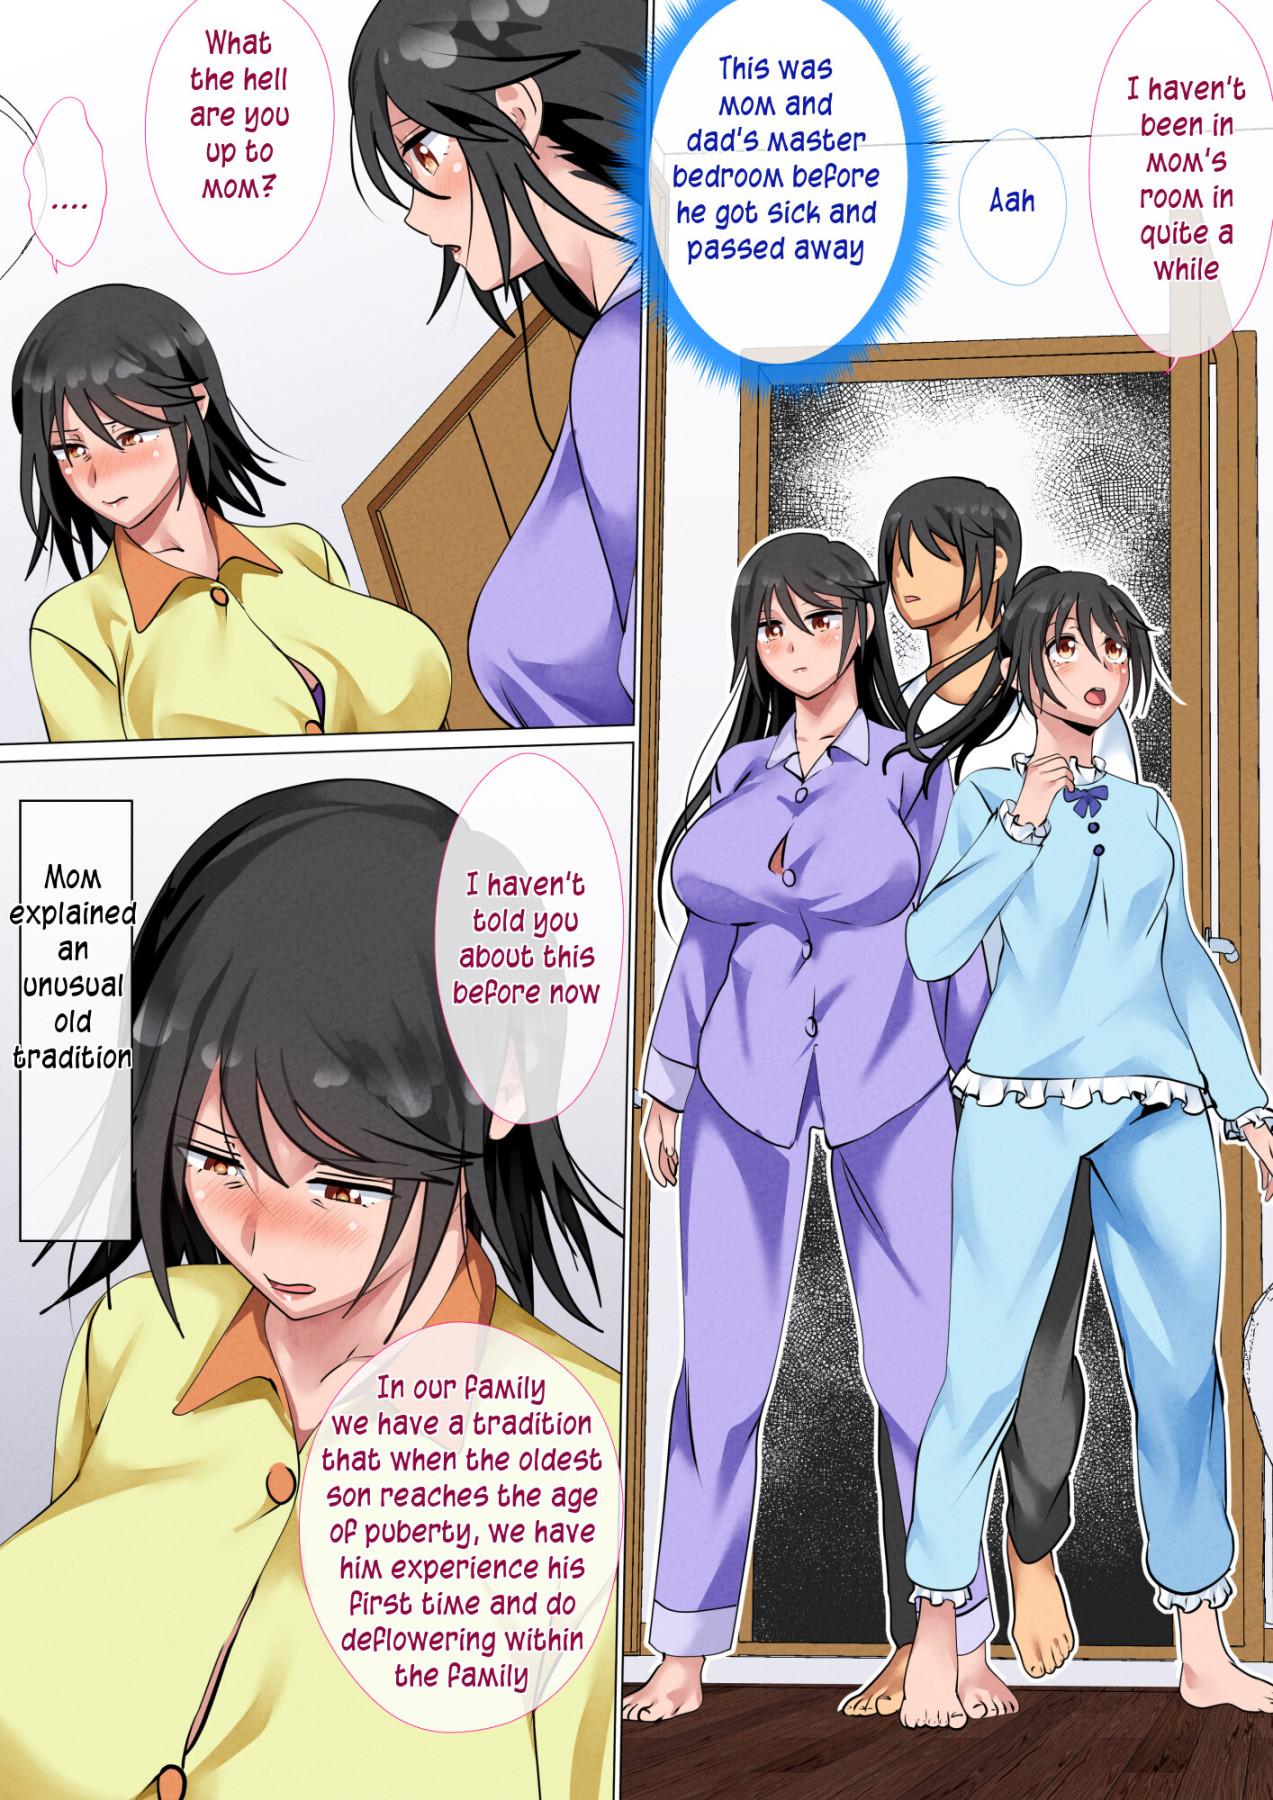 hentai manga A Family With a Tradition of Taking Their Son\'s Virginity